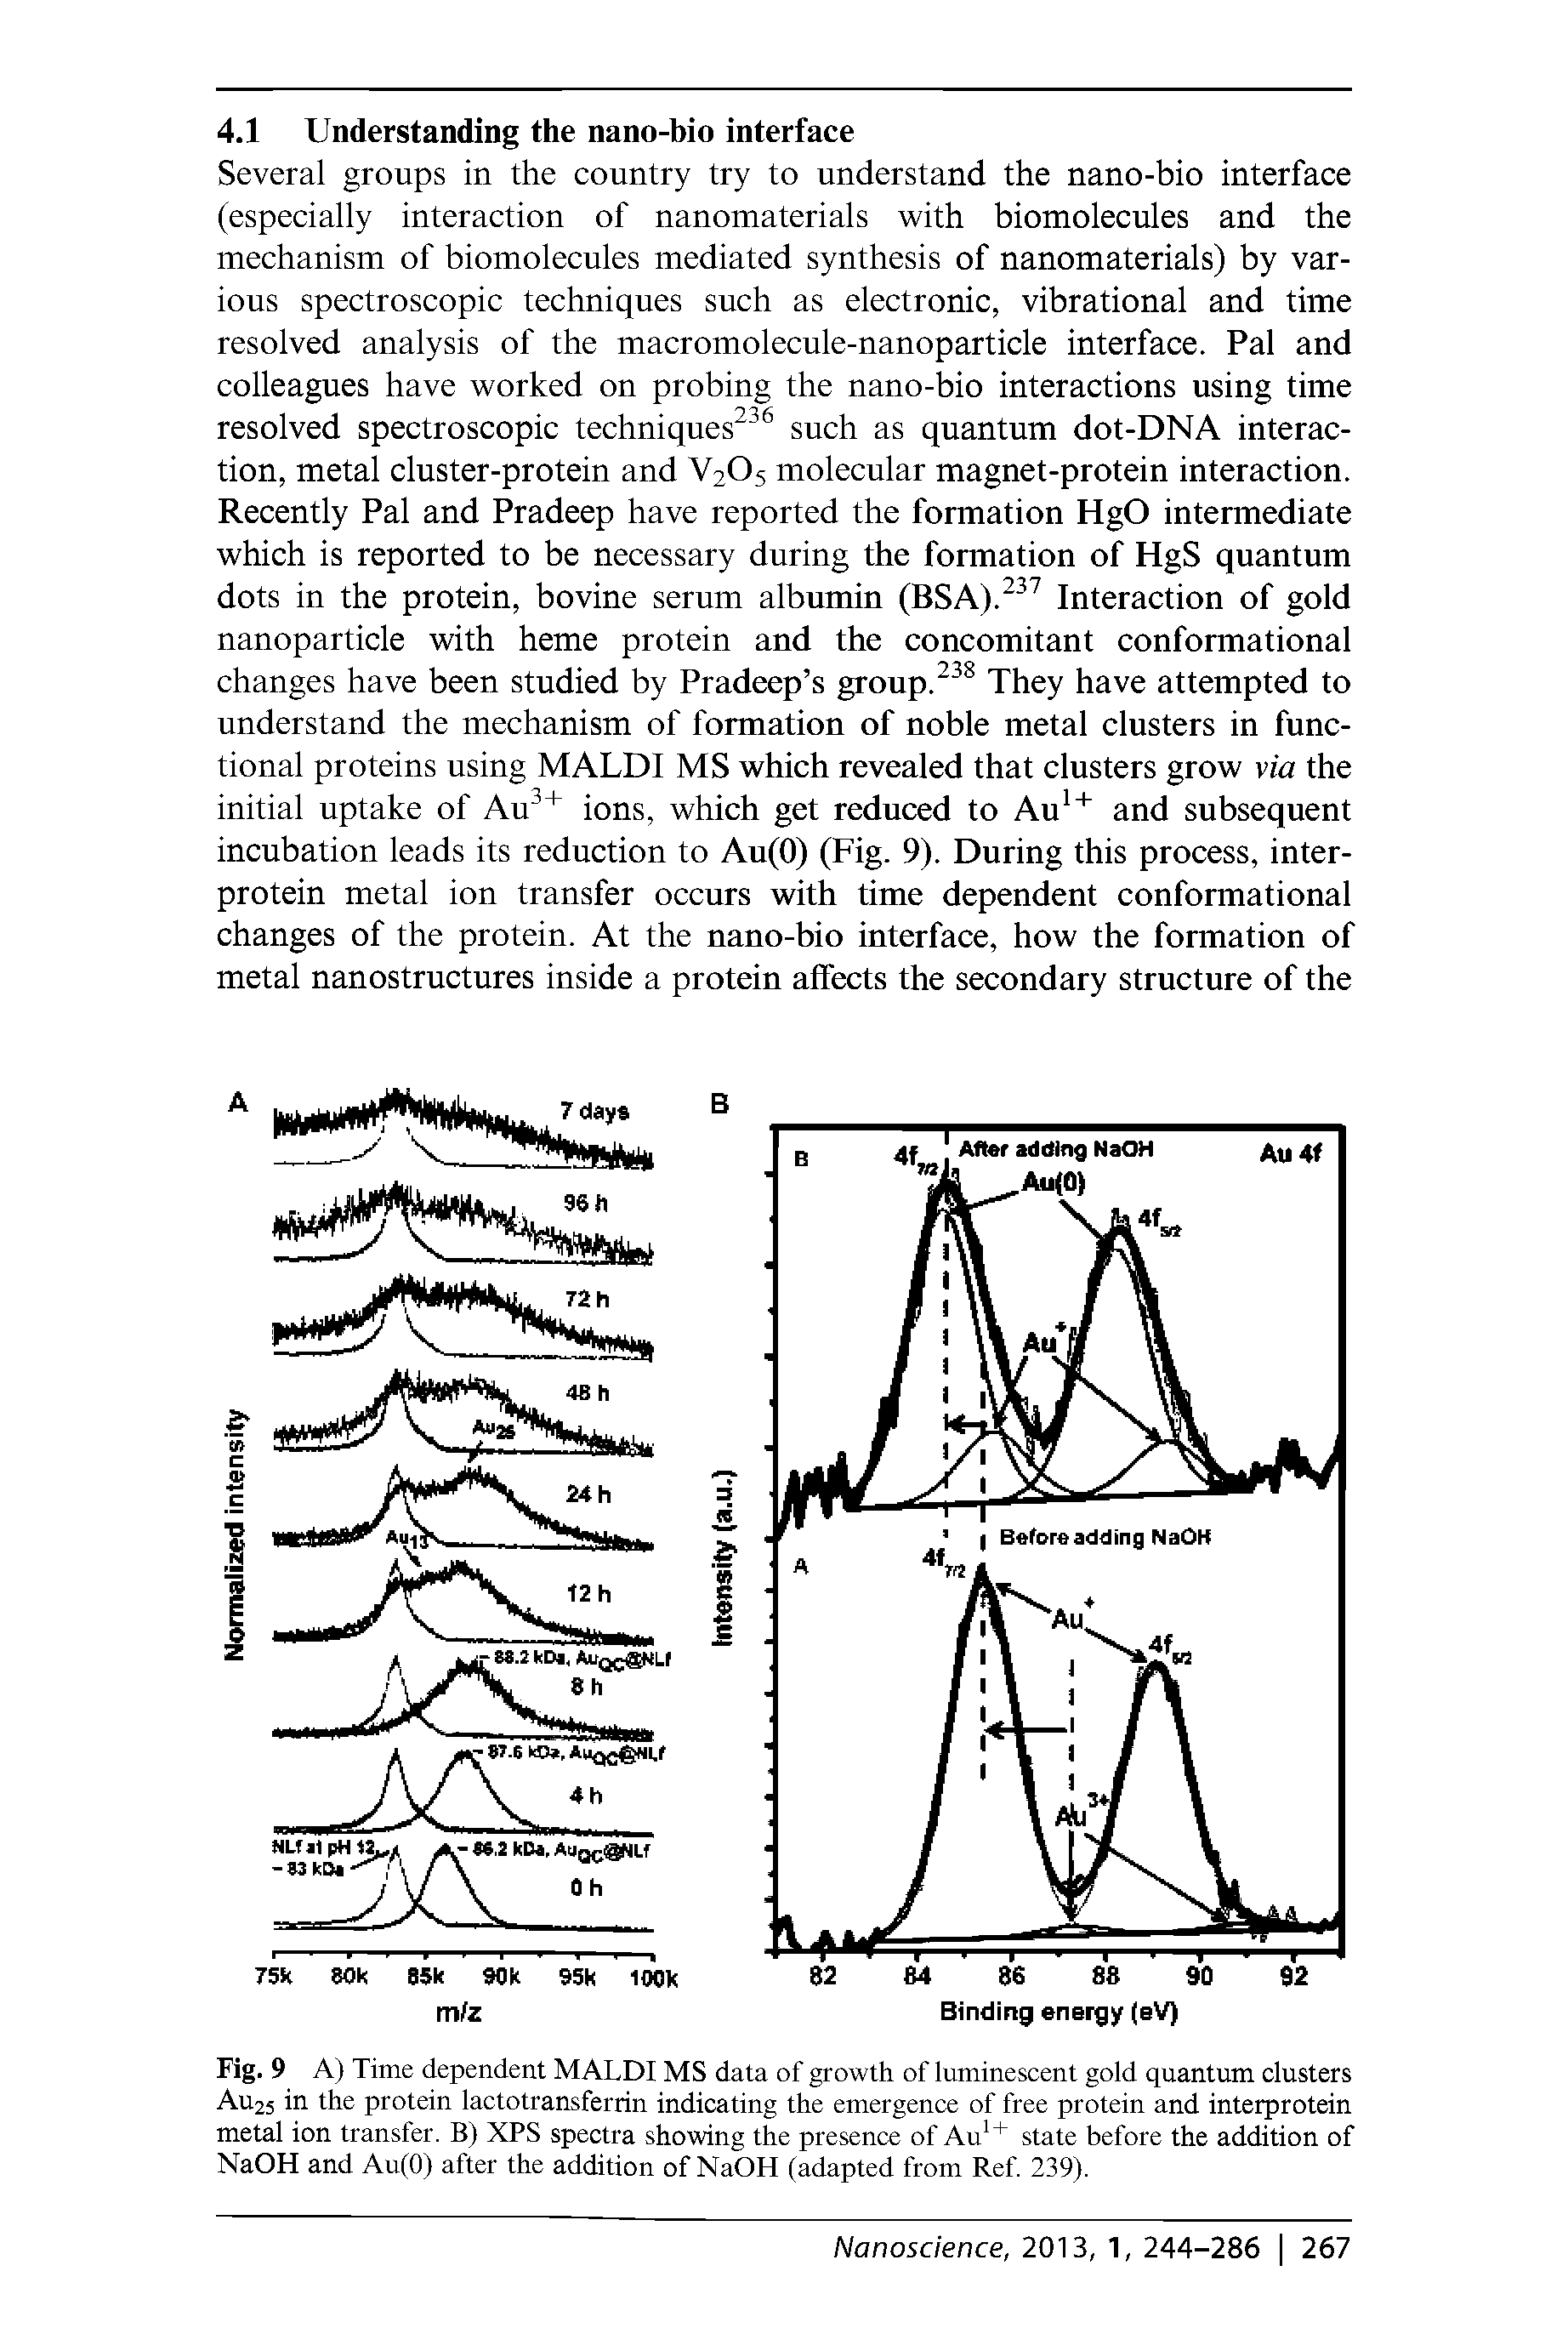 Fig. 9 A) Time dependent MALDI MS data of growth of luminescent gold quantum clusters Au25 in the protein lactotransferrin indicating the emergence of free protein and interprotein metal ion transfer. B) XPS spectra showing the presence of Au state before the addition of NaOH and Au(0) after the addition of NaOH (adapted from Ref. 239).